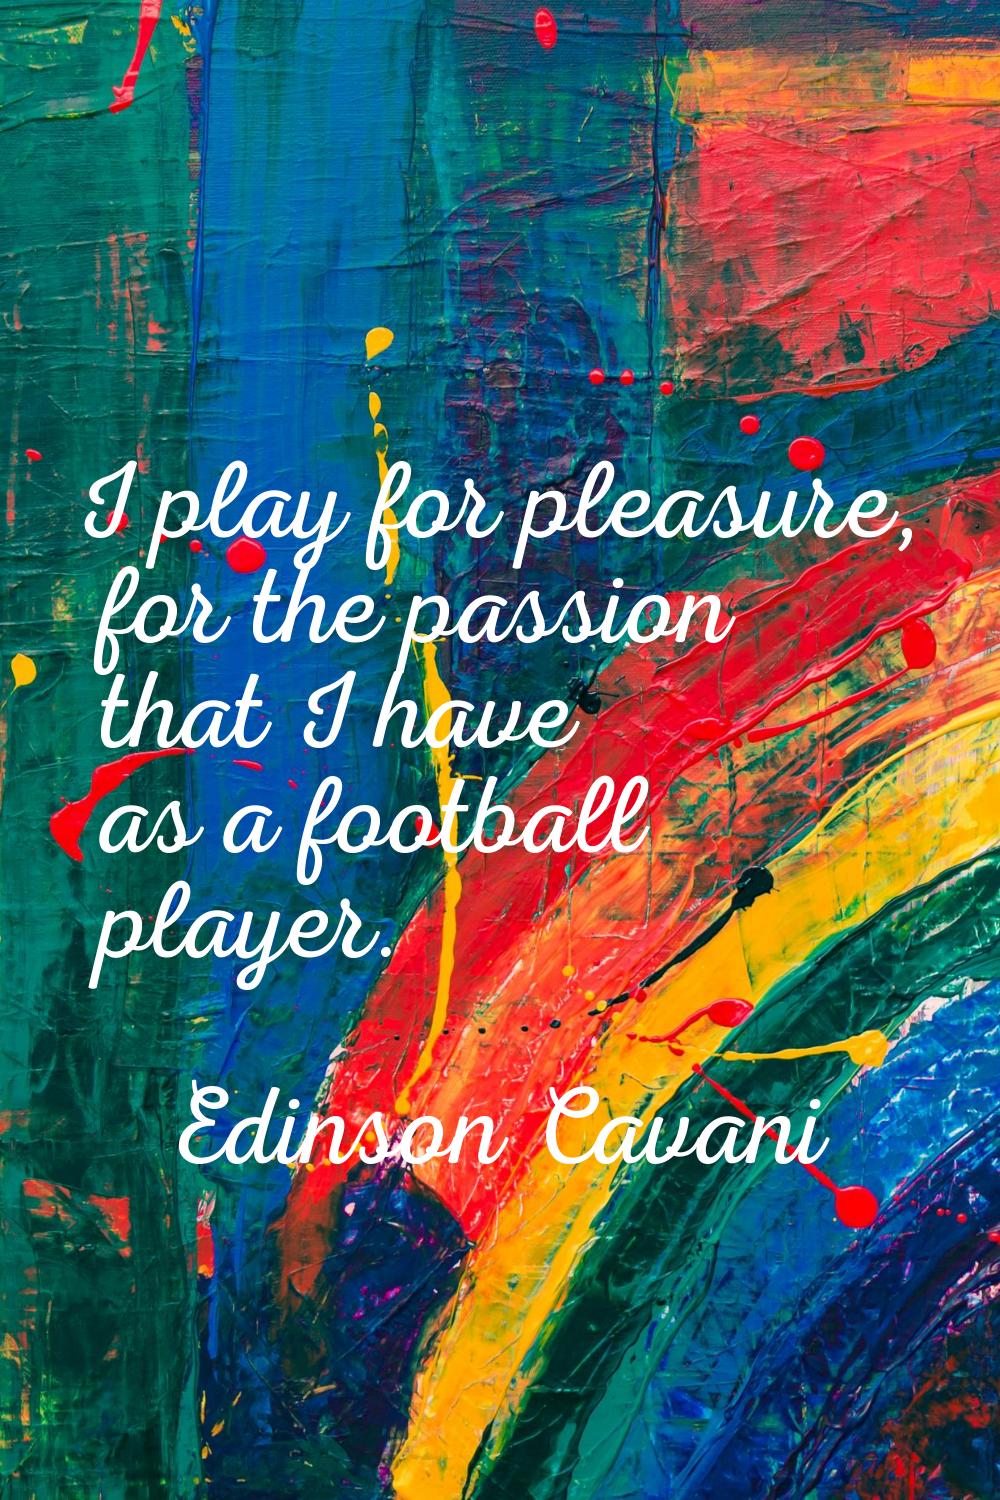 I play for pleasure, for the passion that I have as a football player.